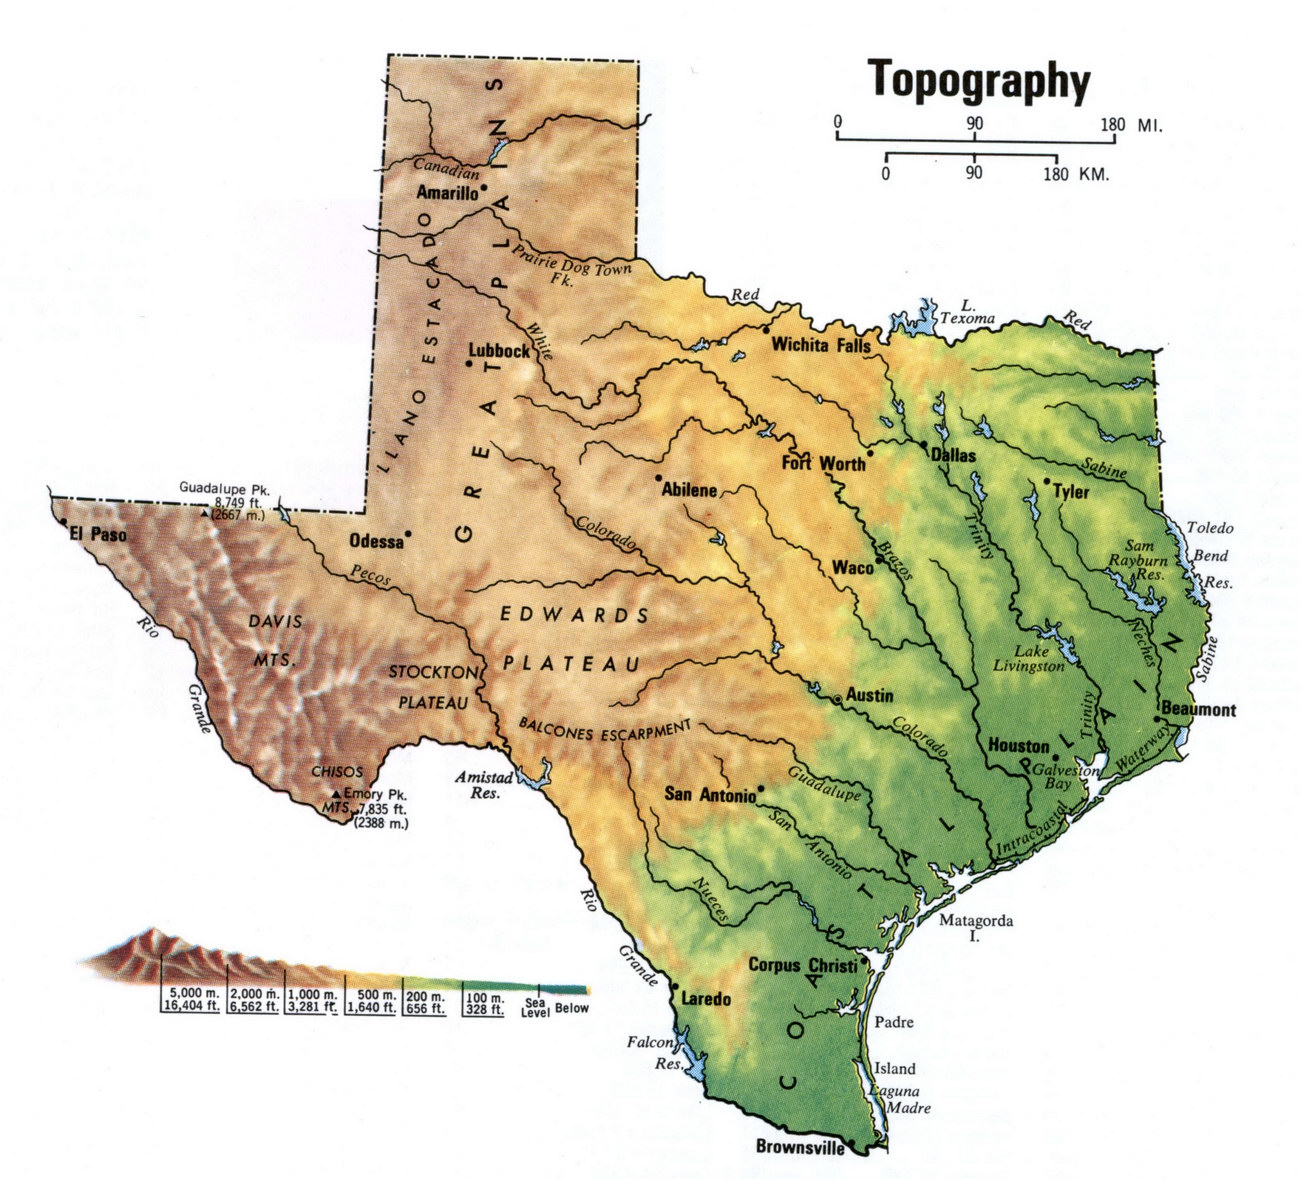 Landscape map of Texas